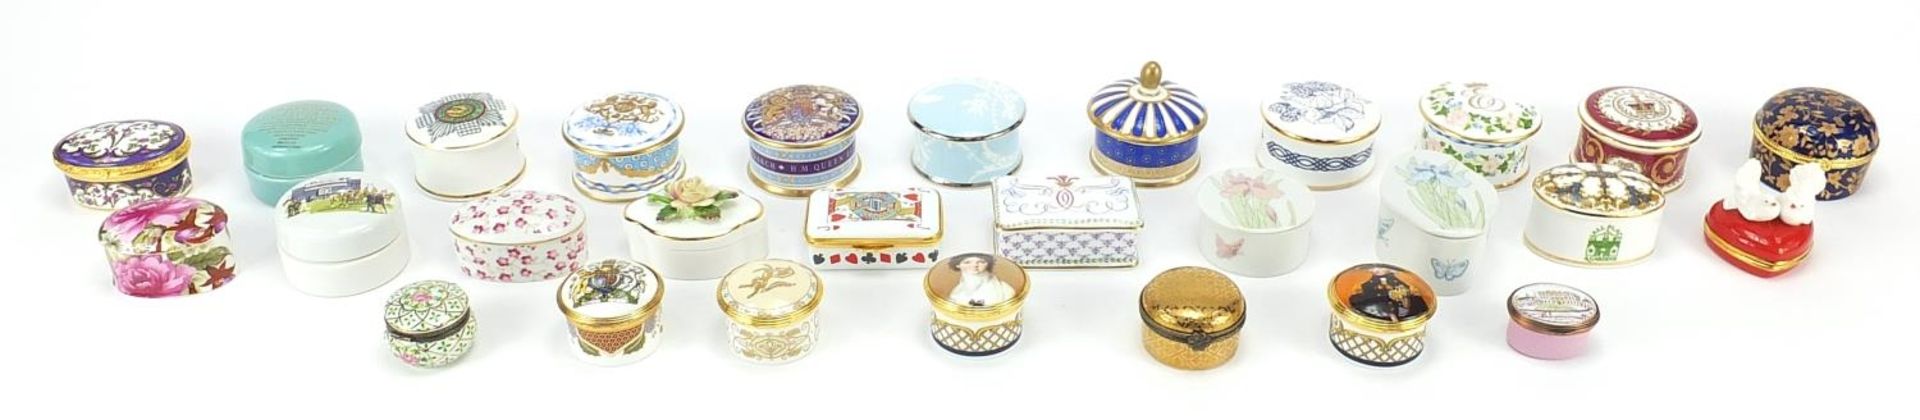 Collection of collectable porcelain and enamel trinket boxes including Halcyon Days, The Royal